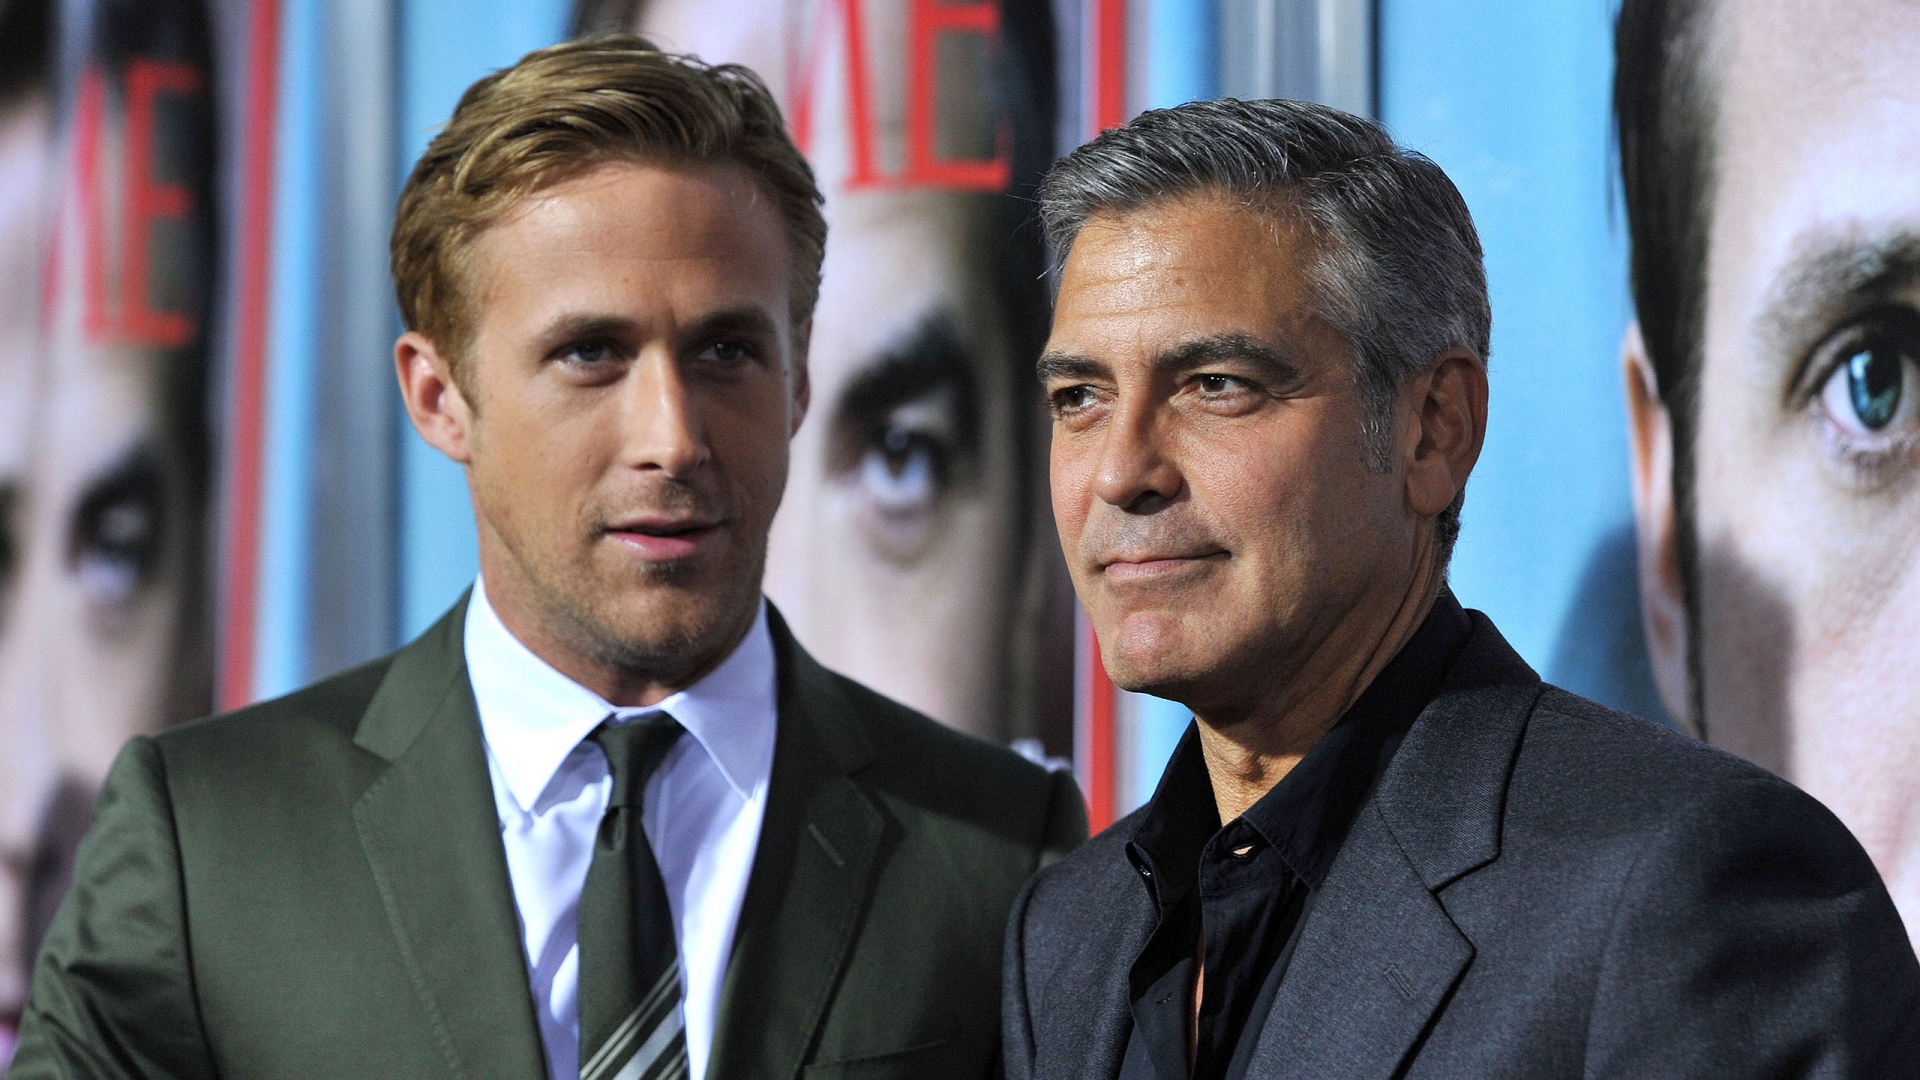 George Clooney and Ryan Gosling for 1920 x 1080 HDTV 1080p resolution